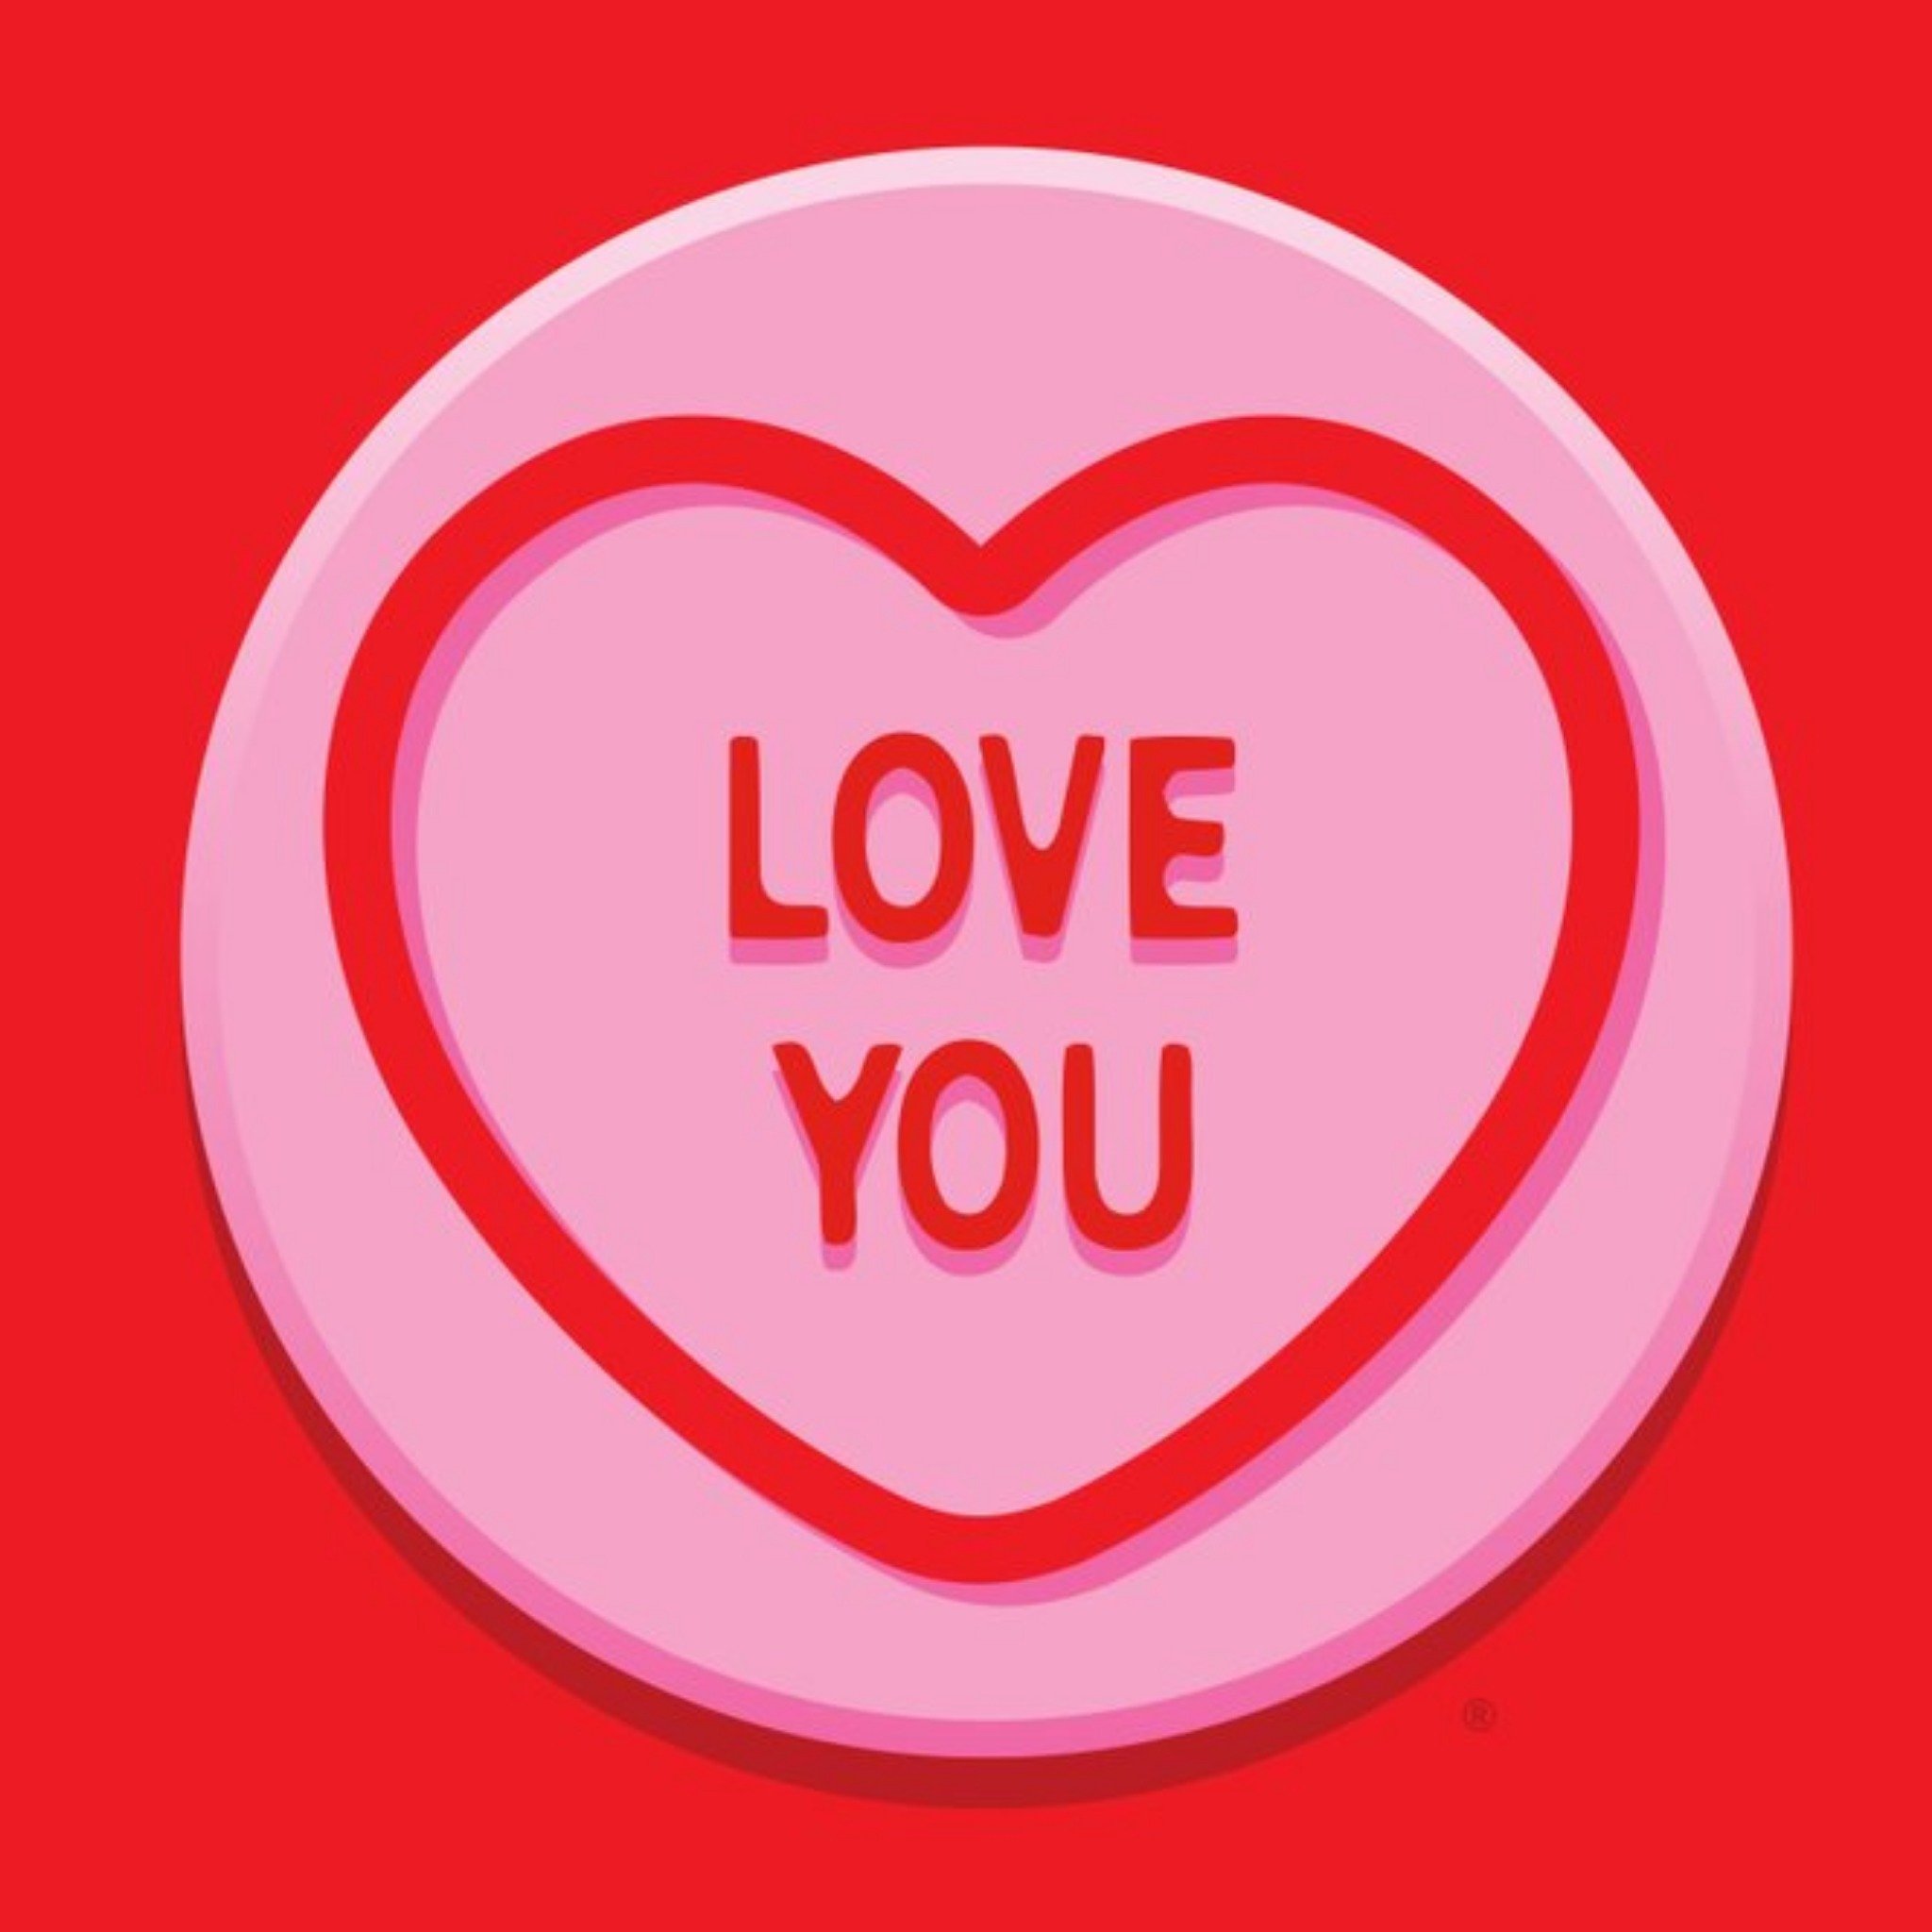 Love Hearts Swizzels Pink Love Heart Love You Valentine's Day Card, Large